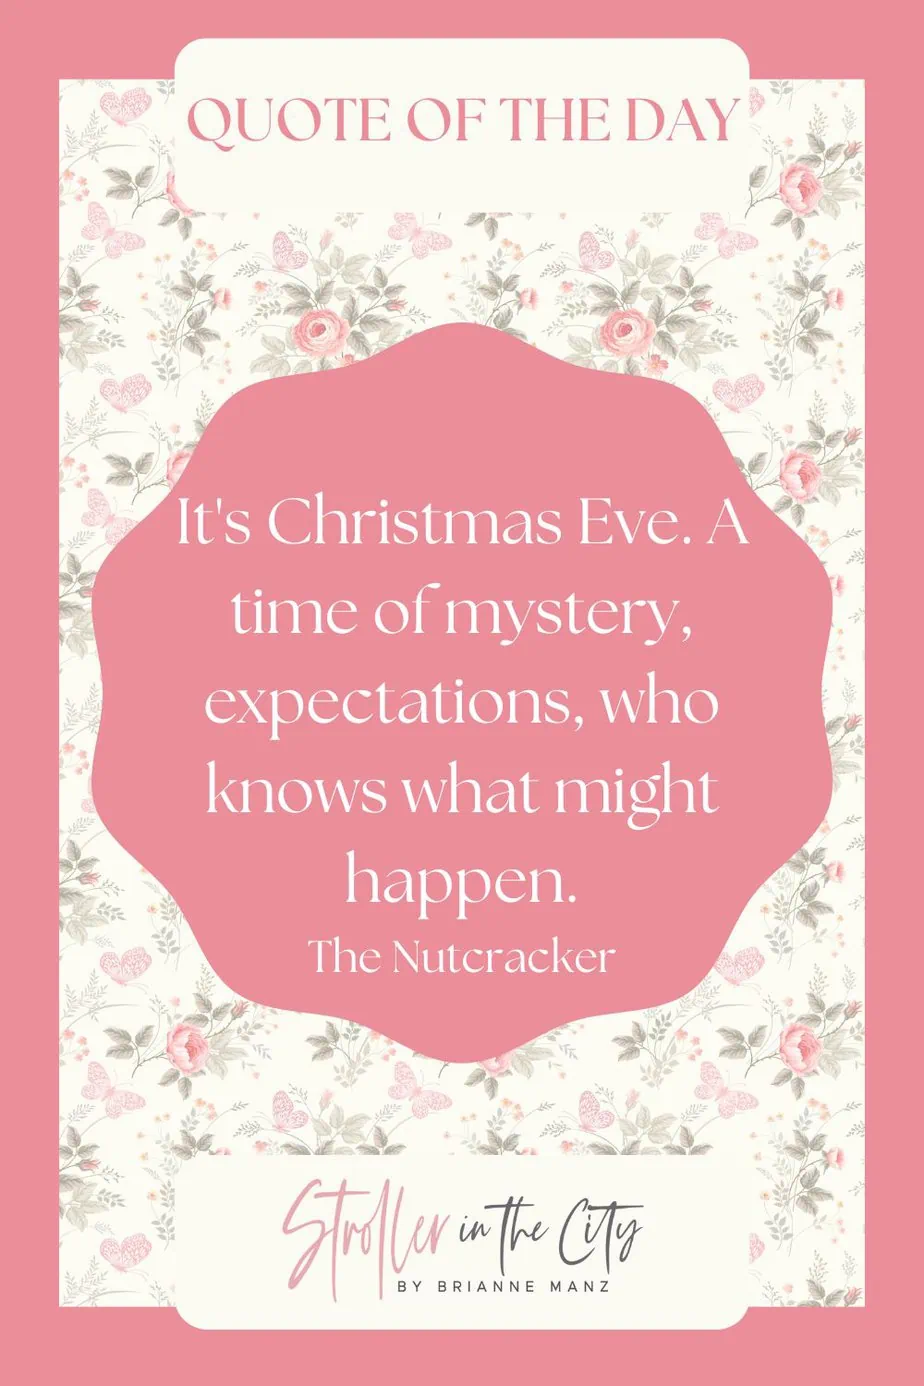 nutcracker holiday quote